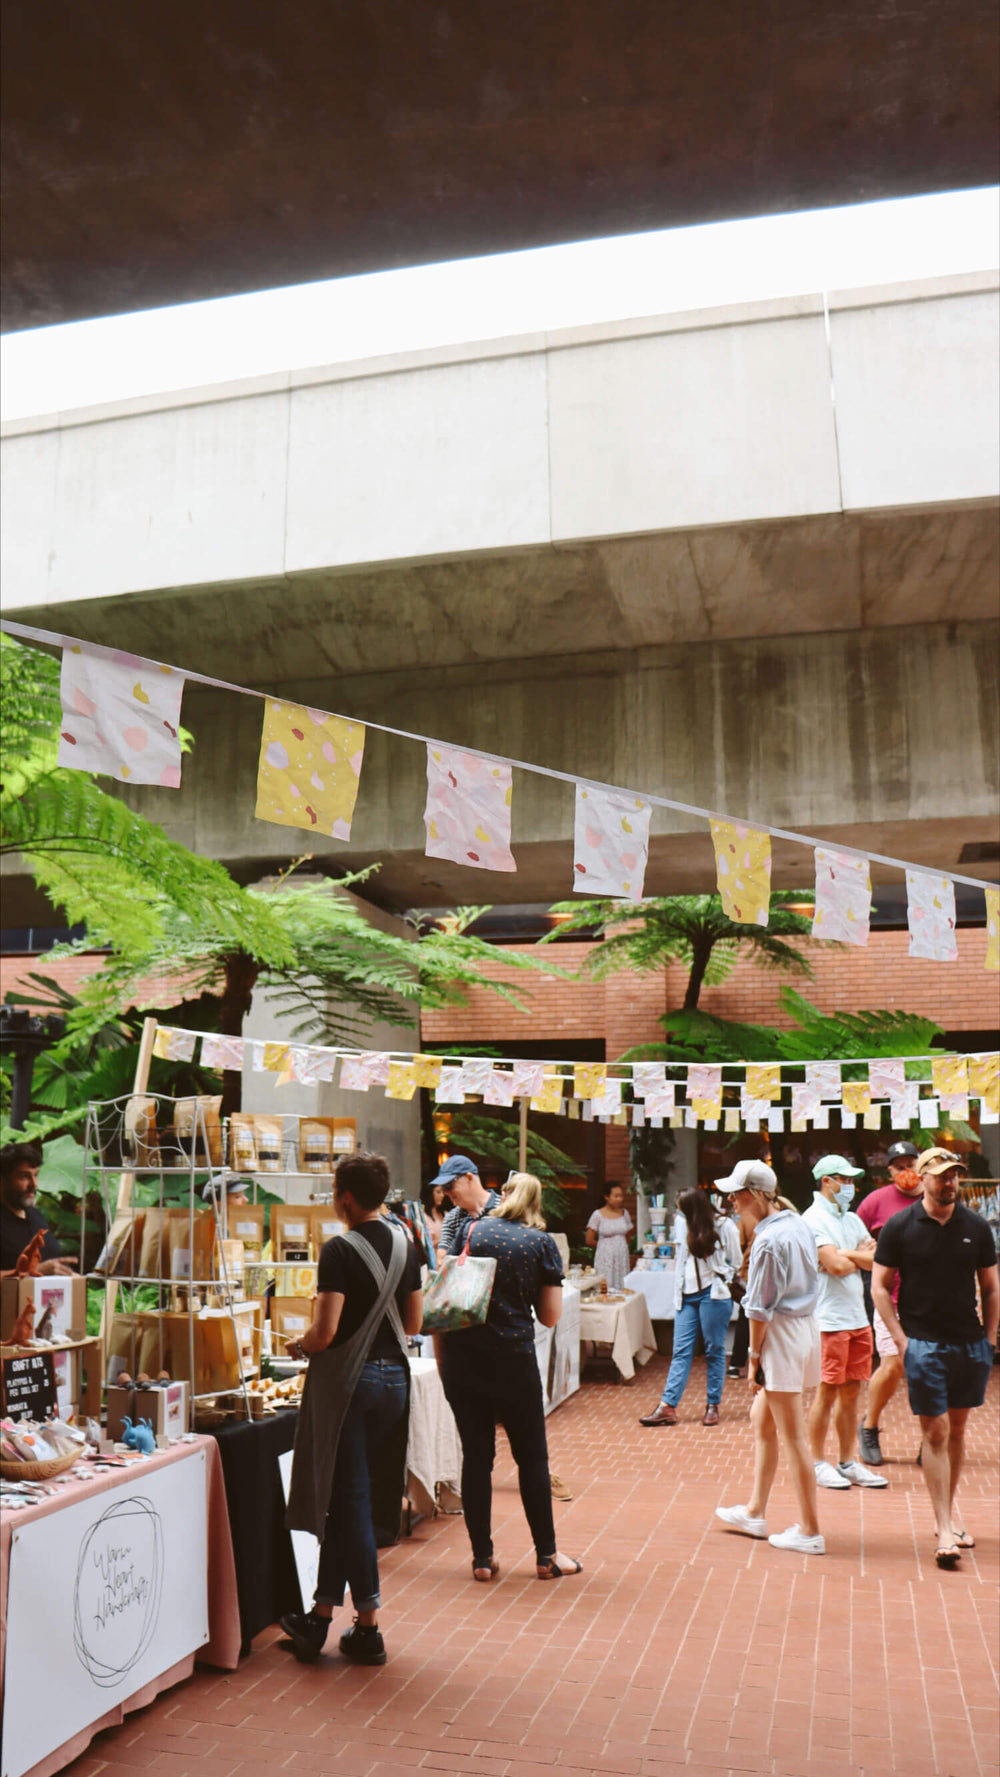 Outdoor handmade markets for creative businesses in Brisbane.